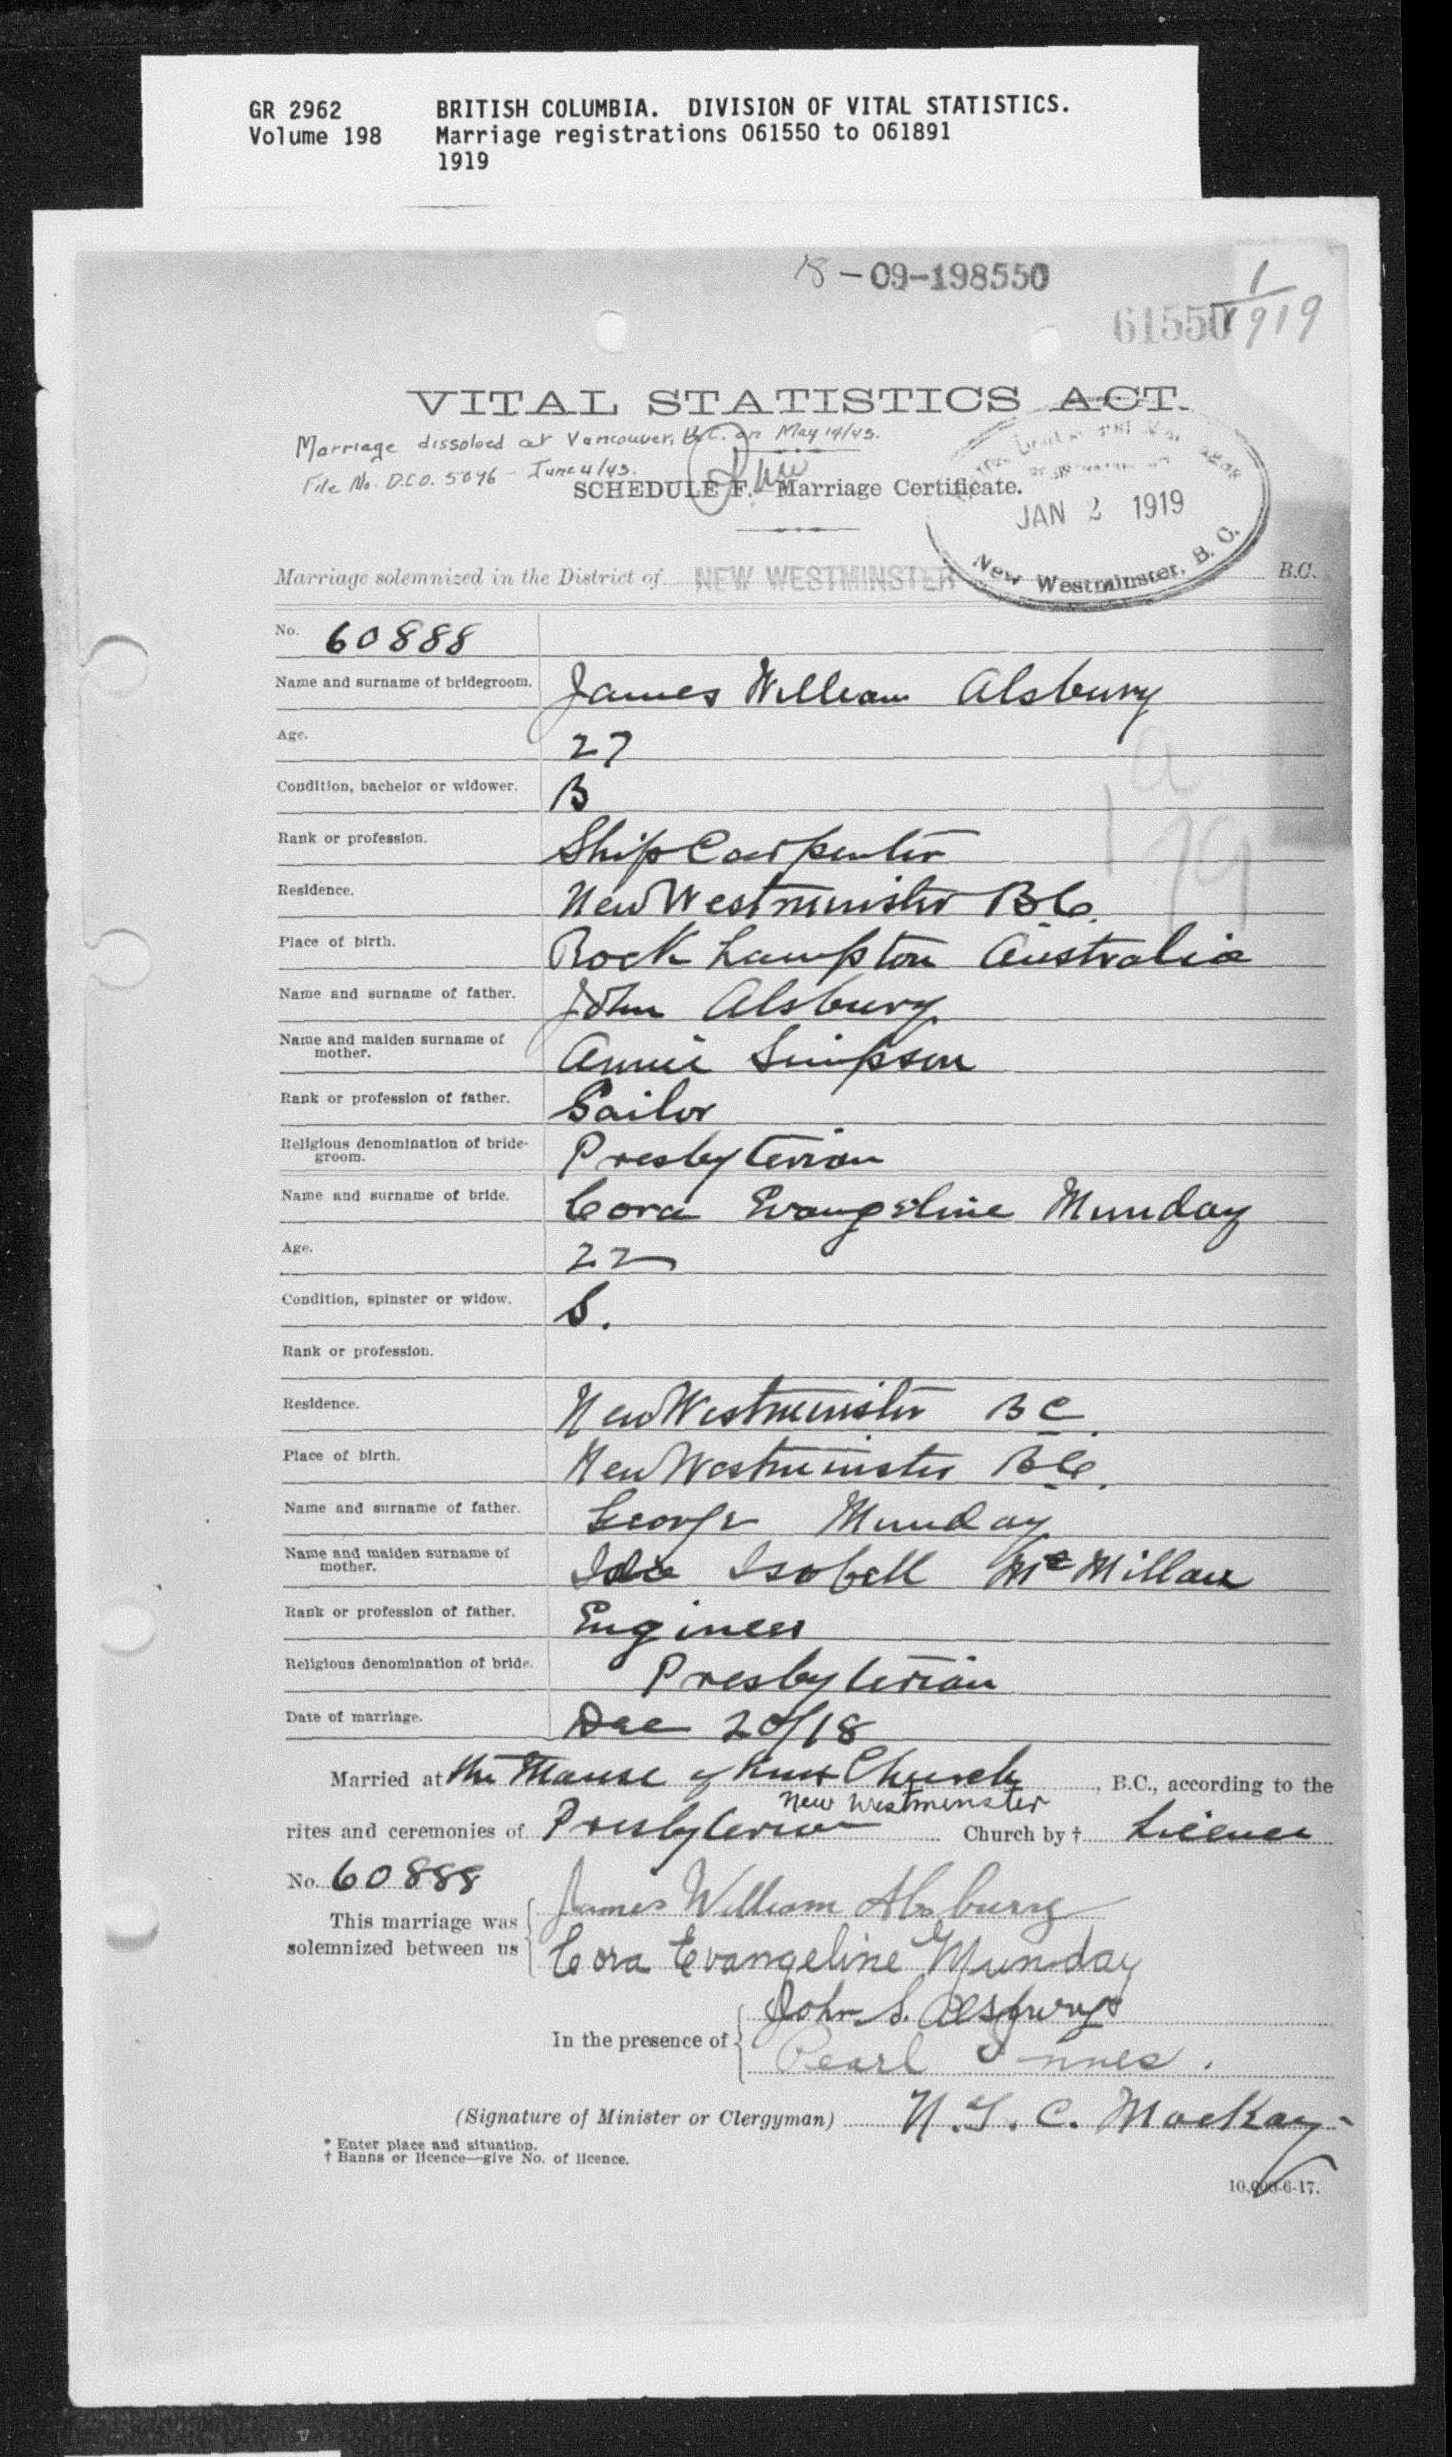 23 - Marriage Certificate, James Alsbury and Cora Munday, 1918  Opens in new window